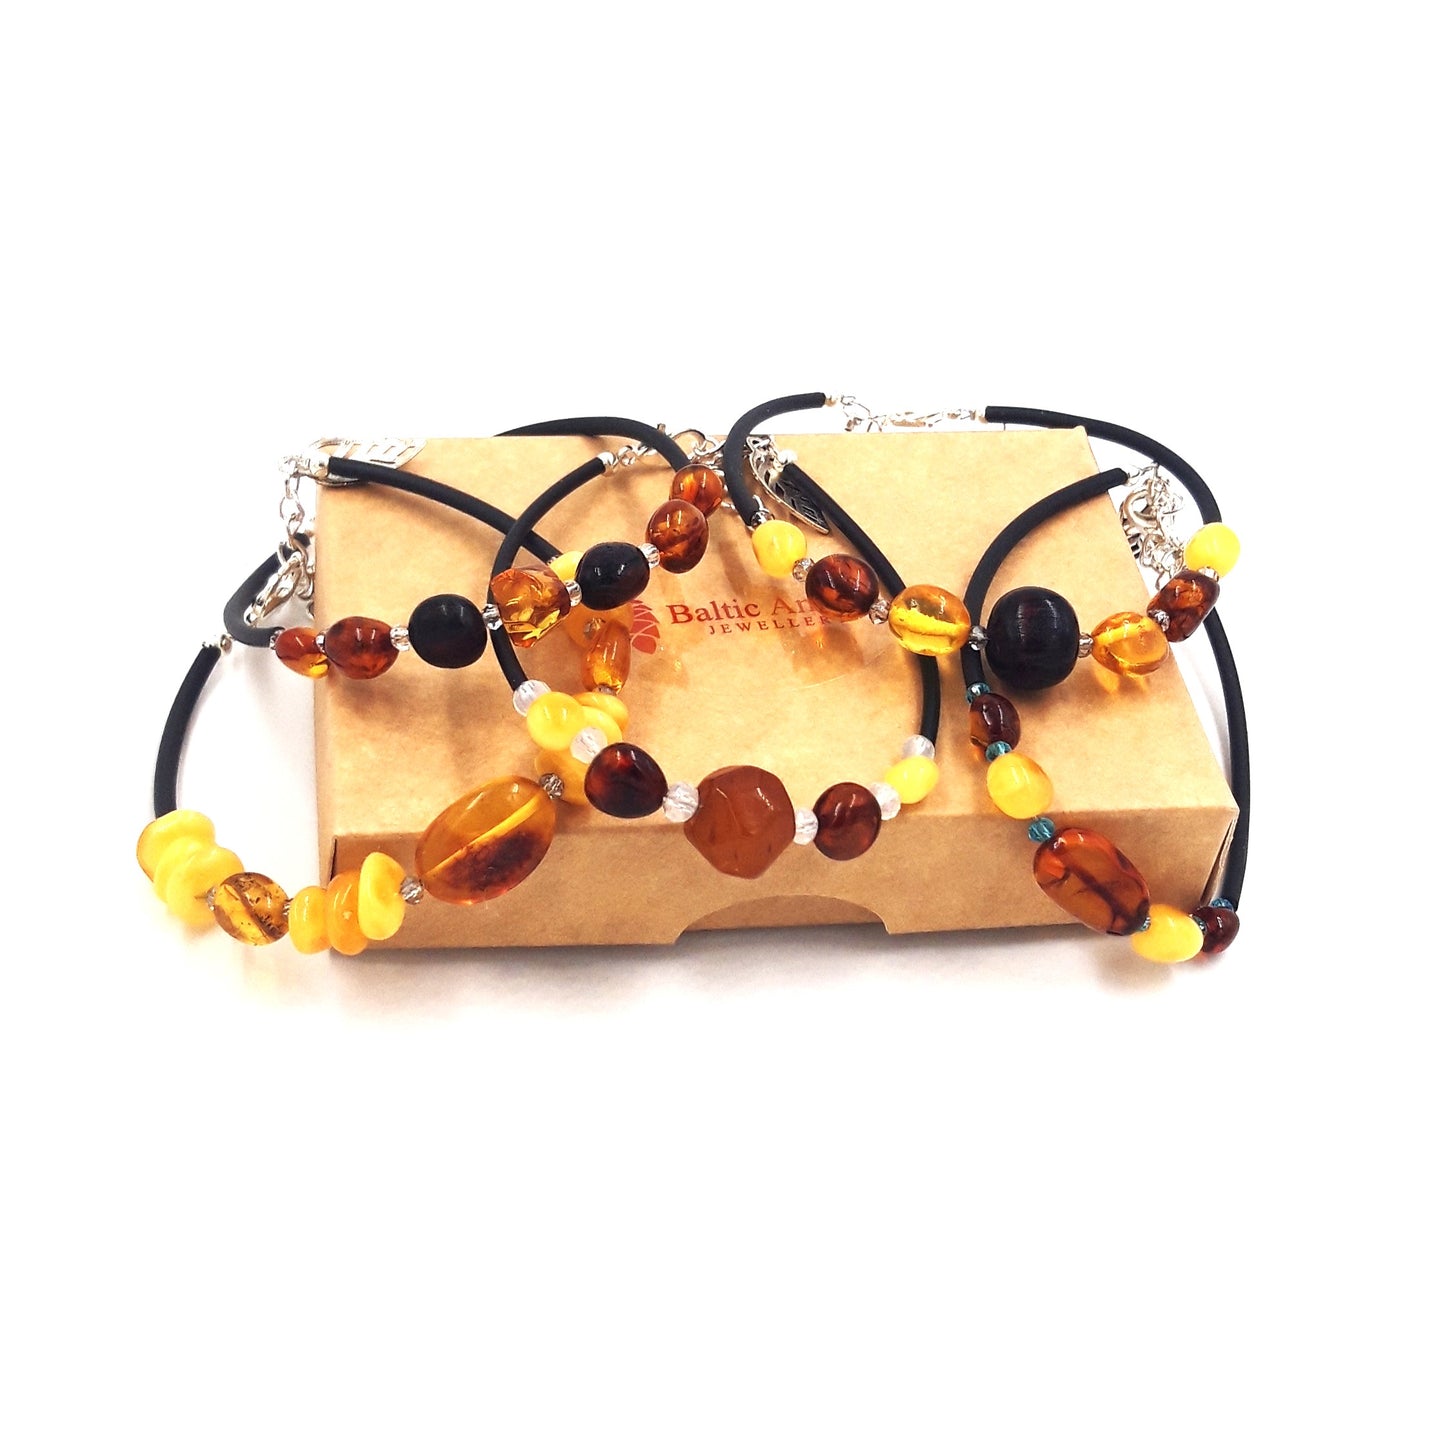 Bracelet set for adults with Baltic amber(5 units)